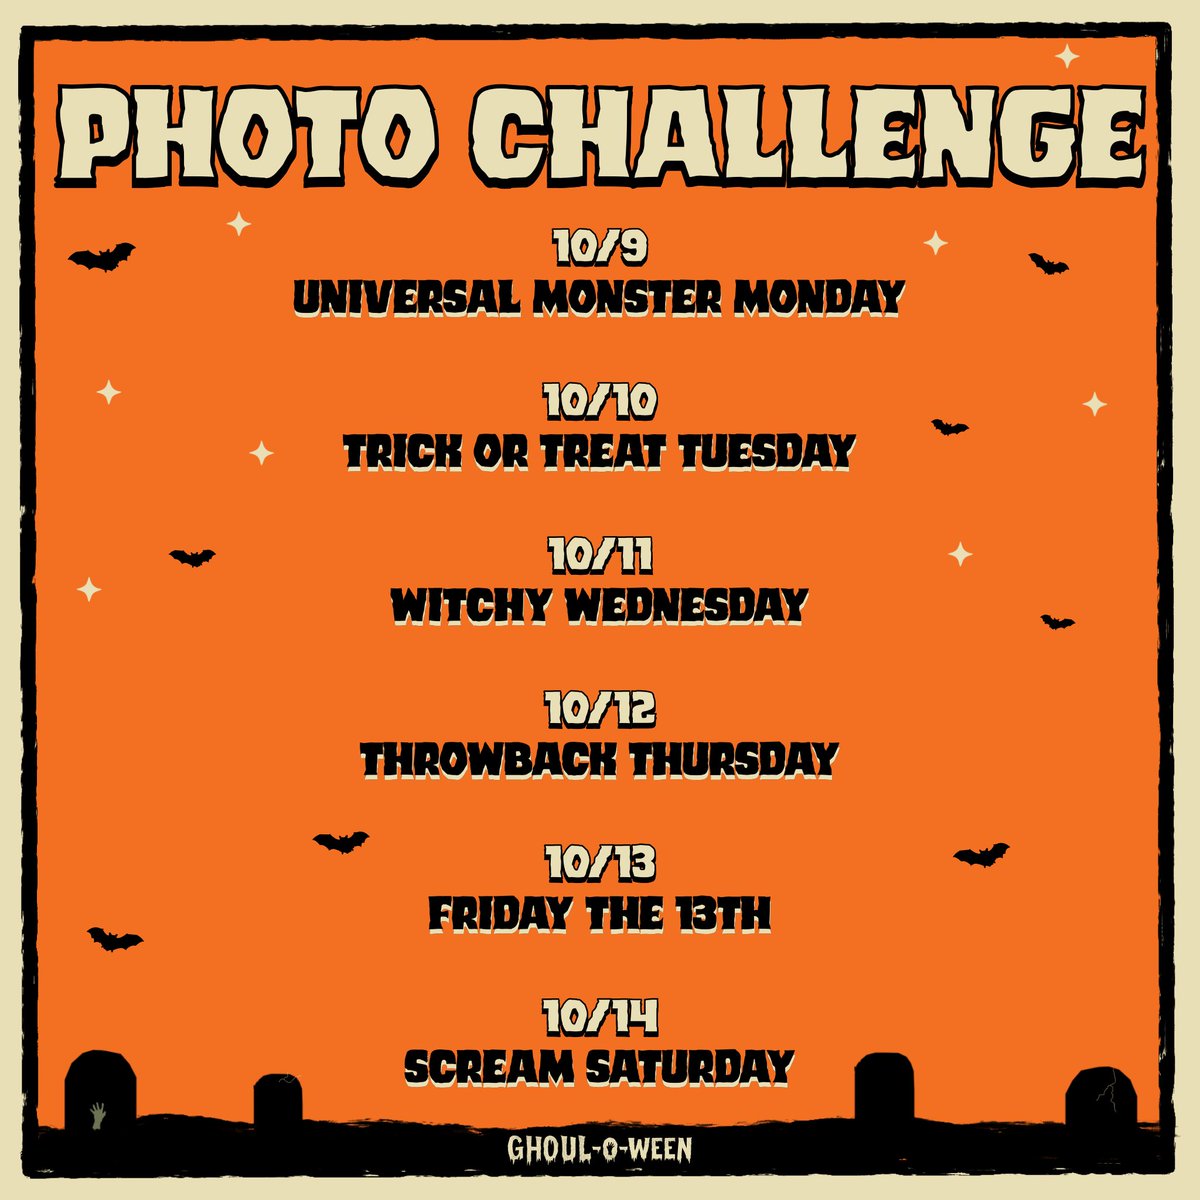 Presented by Ghoul Media: The Ghoul-o-ween Photo Challenge (Part 1) happening over on Instagram! 
#Ghoul #GhoulMedia #Ghouloween #Halloween #Horror #Funko #FunkoPops #NECA #Super7 #TinyGhost #AbominableToys #MischiefToys #Gastley #Whatnot #NYCC #NewYorkComicCon #NYCC2023